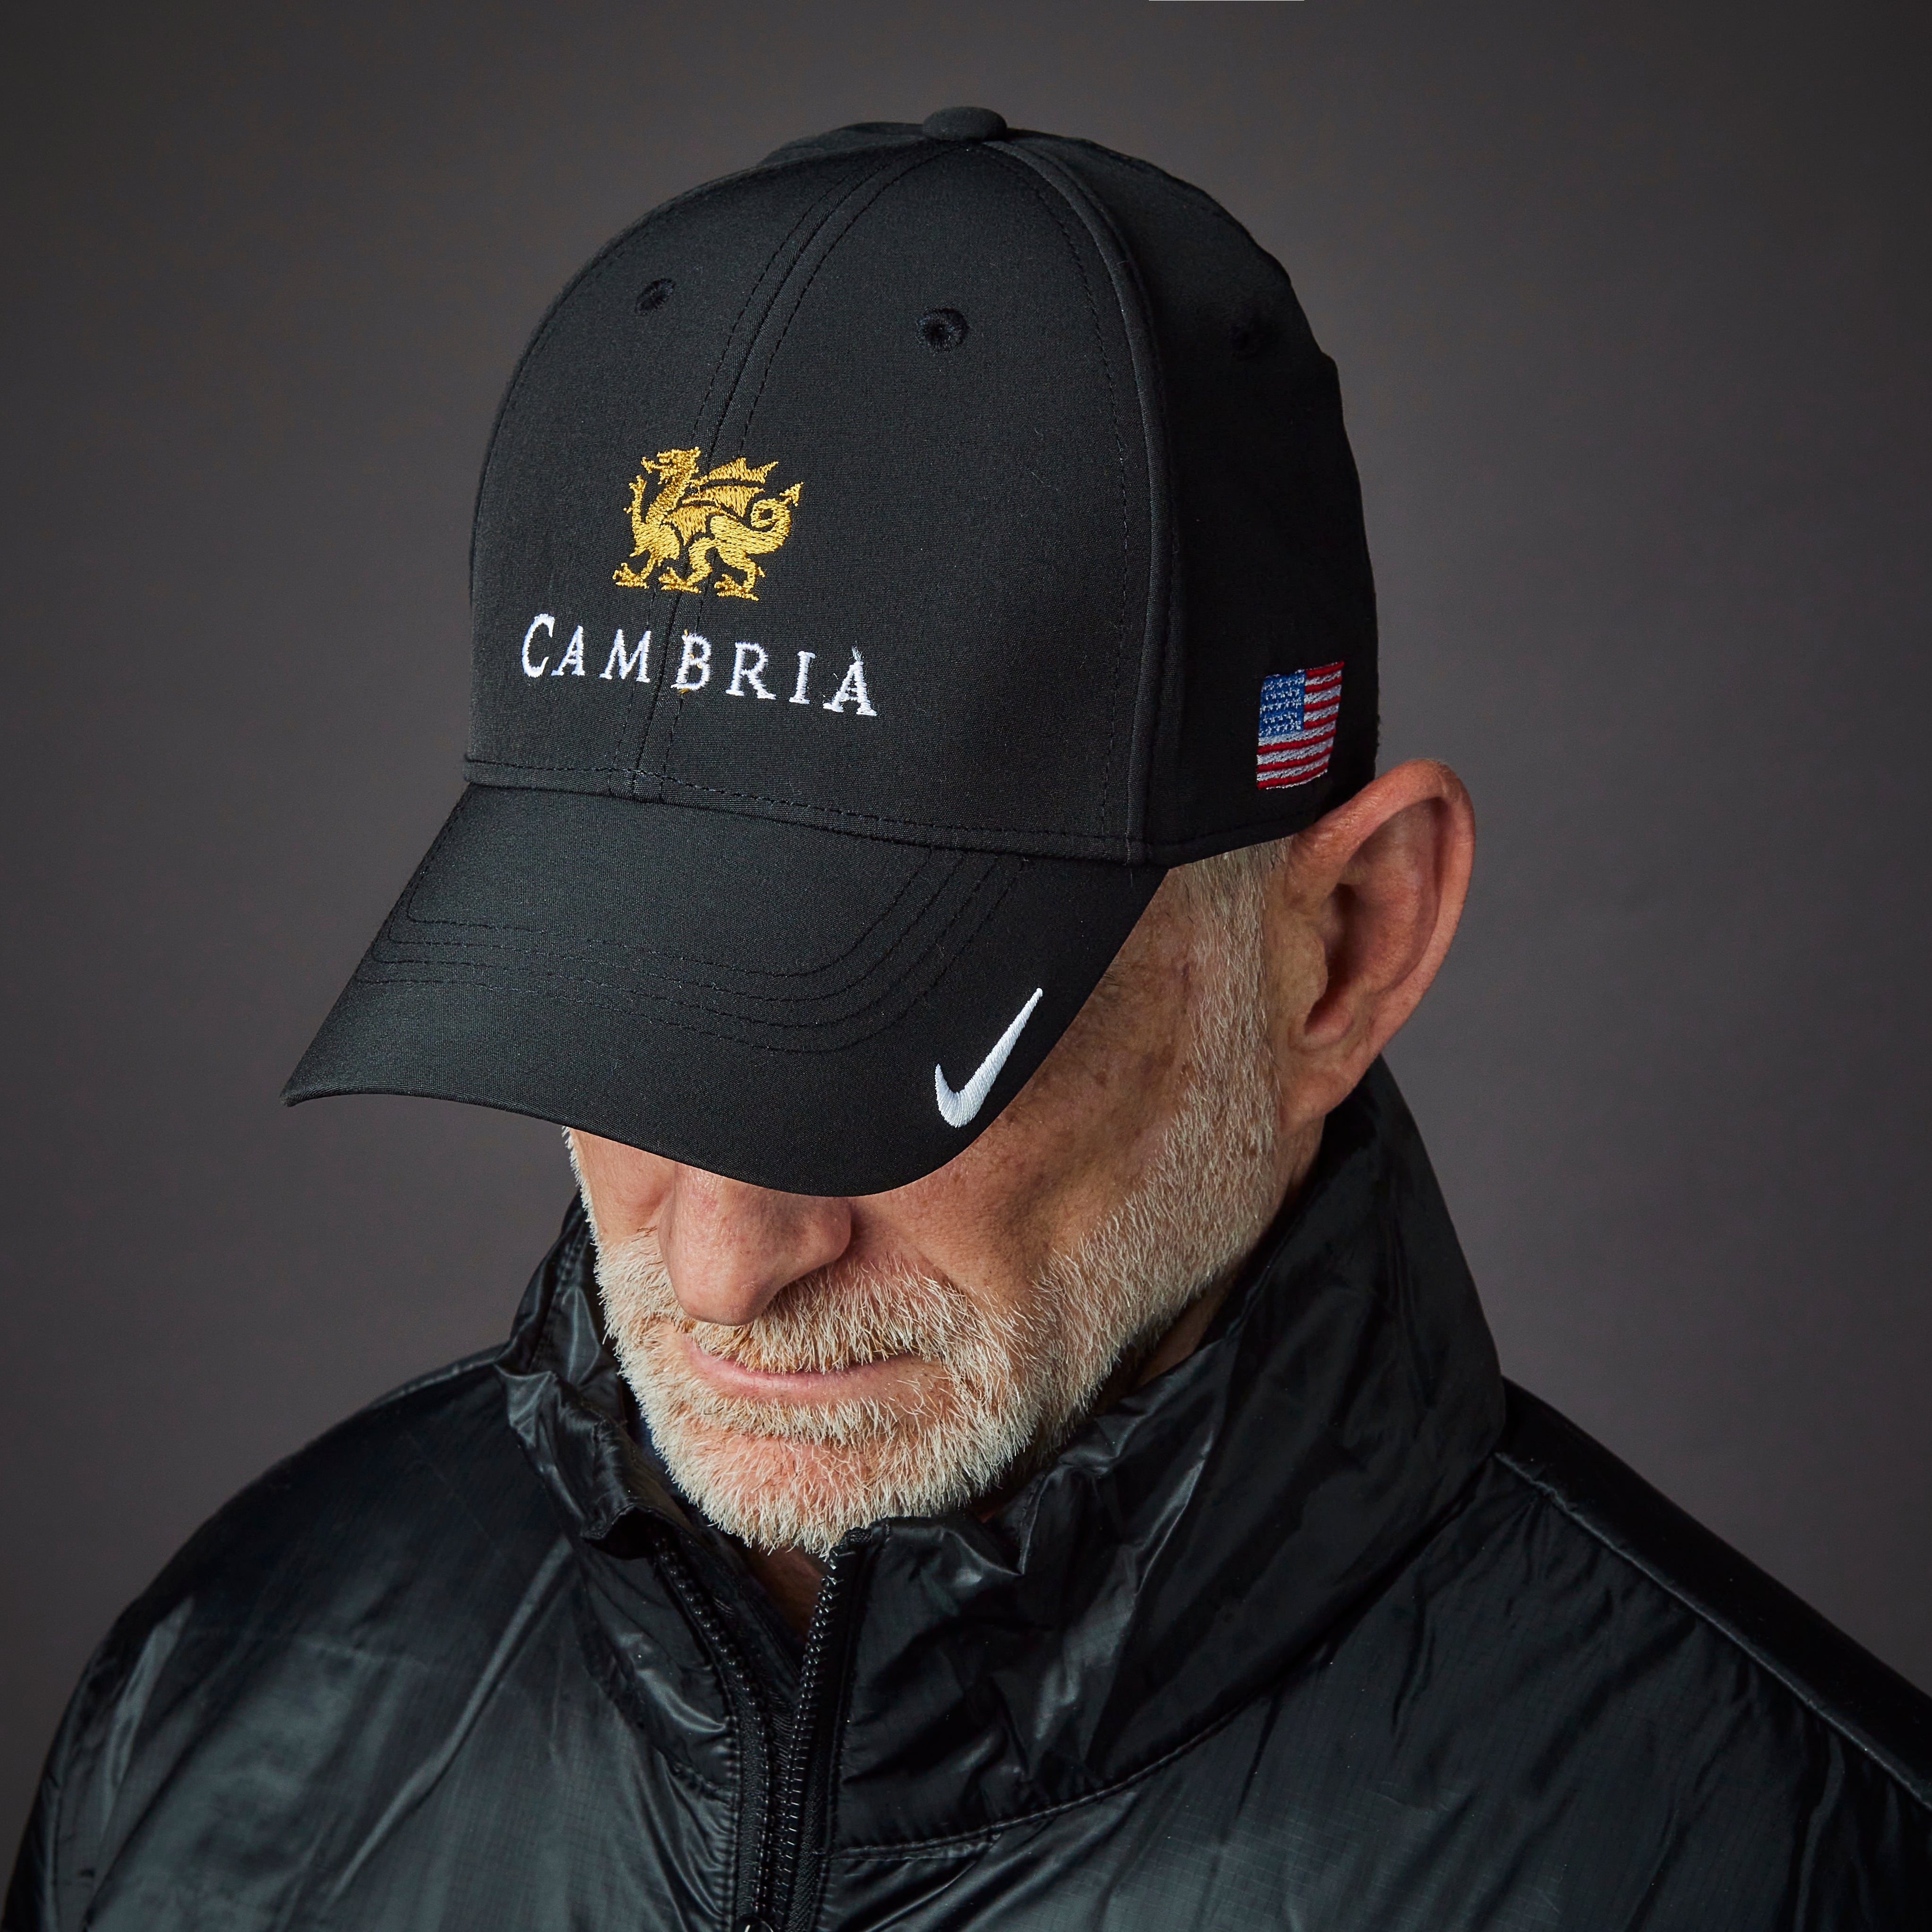 Nike Hat – Cambria Life + Style